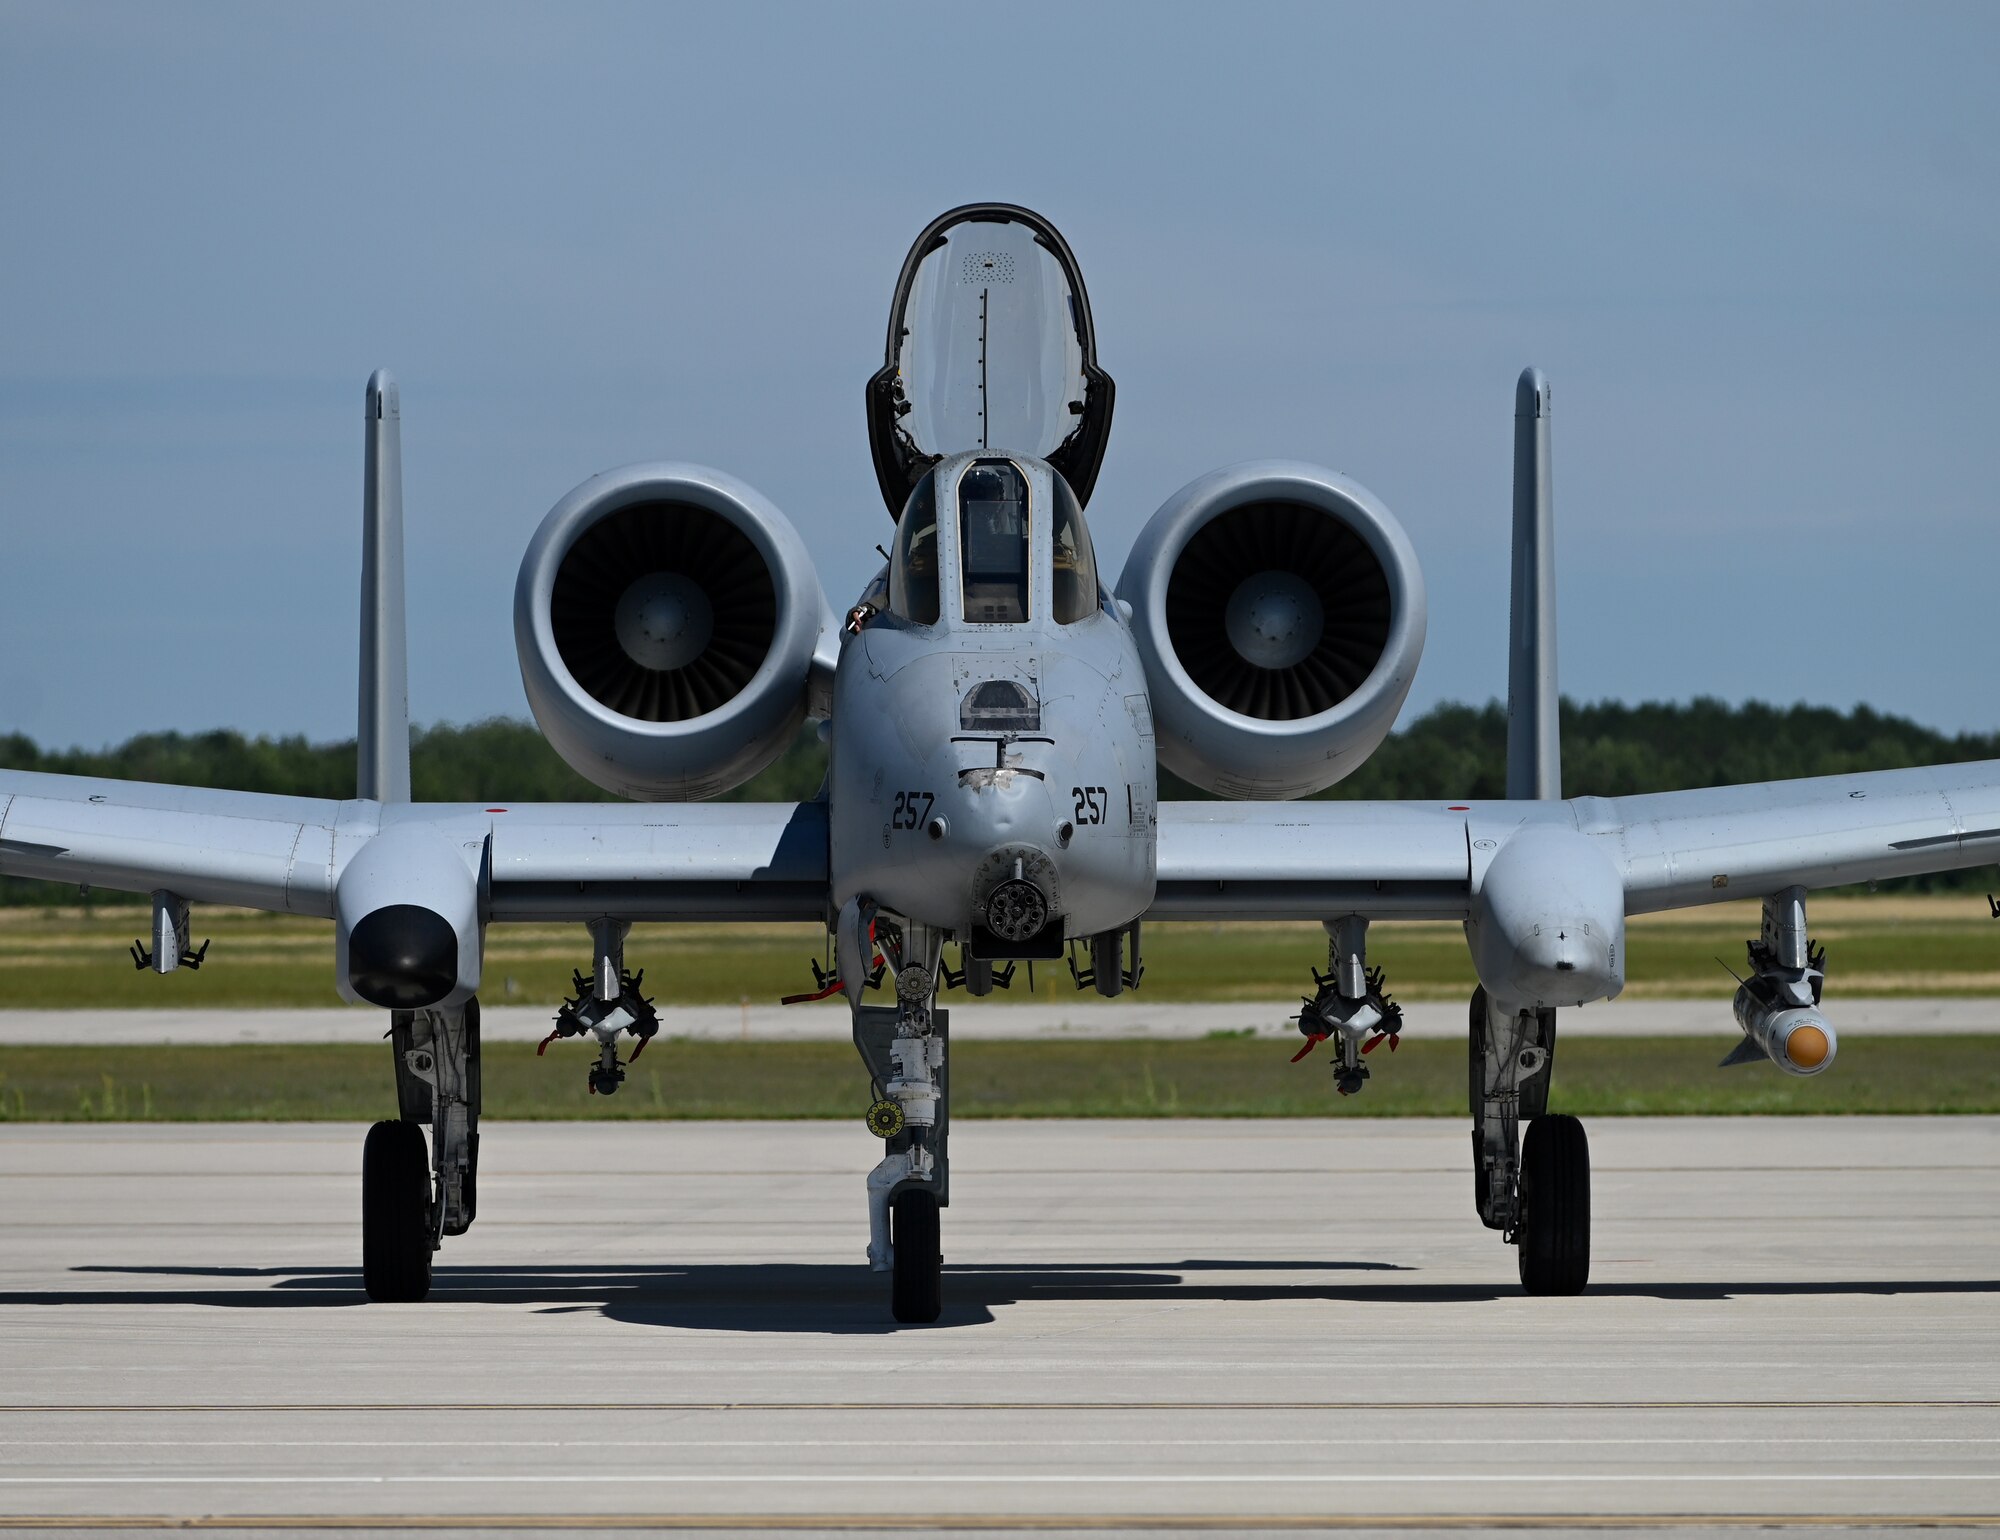 An A-10 Thunderbolt II from the 107th Fighter Squadron, Selfridge Air National Guard Base, Mich., taxis to a hot-pit maintenance area set up by the 174th Maintenance Group Detachment 1 maintenance team during Northern Strike 20 in Alpena, Mich., July 27, 2020. The 174th MXG Det. 1 is a New York Air National Guard unit located in Ft. Drum, New York. The unit has provided maintenance support to Northern Strike since 2012. Northern Strike is the National Guard Bureau’s largest joint, multi-component exercise and takes place at the National All-Domain Warfighting Center in Northern Michigan.